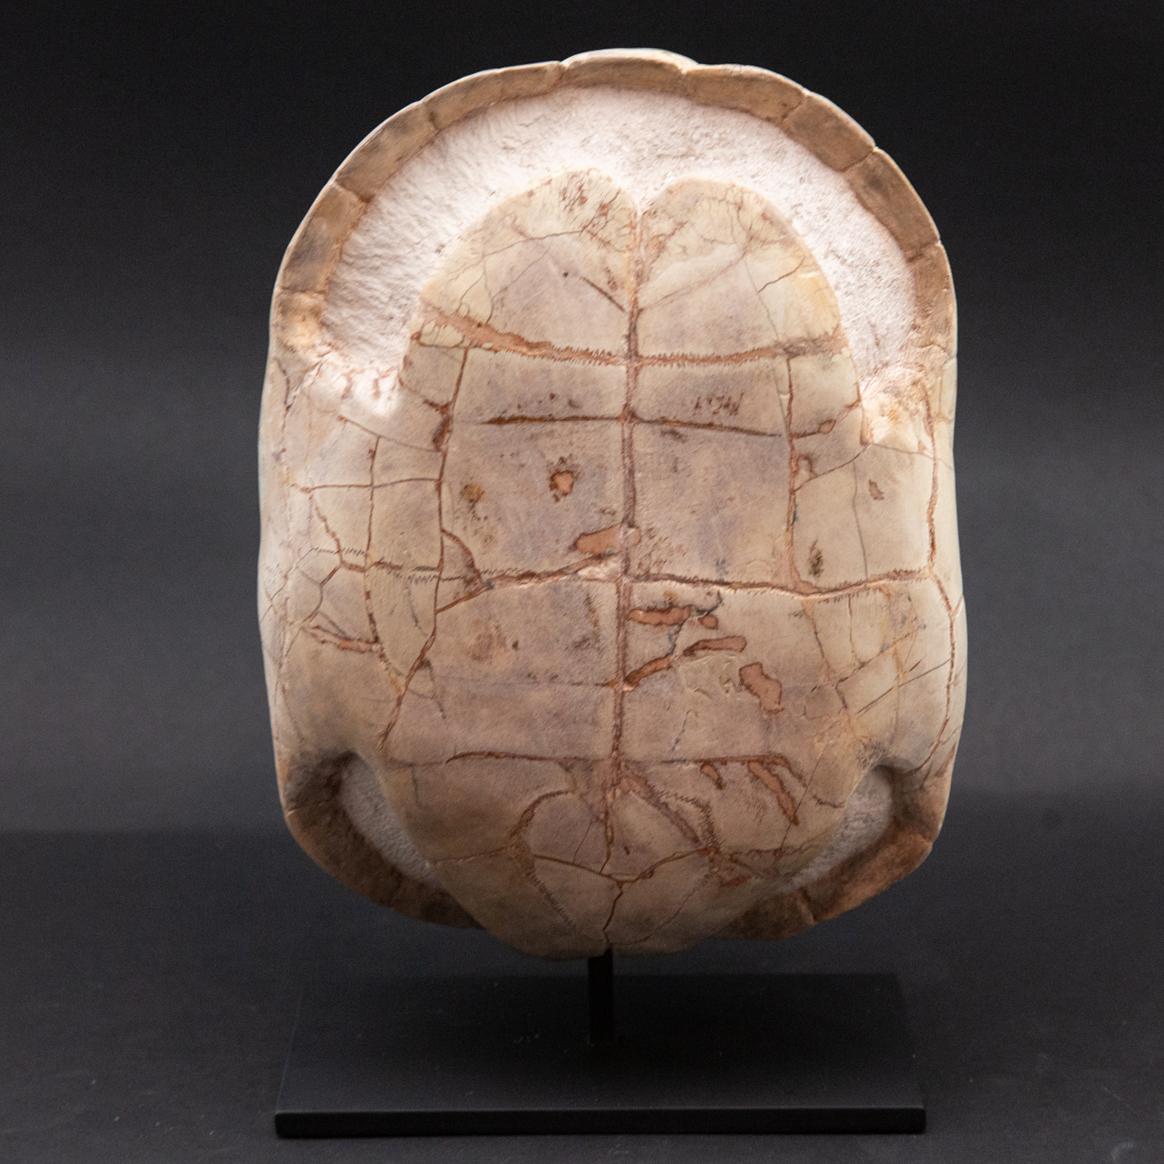 Contemporary Mounted Fossilized Turtle